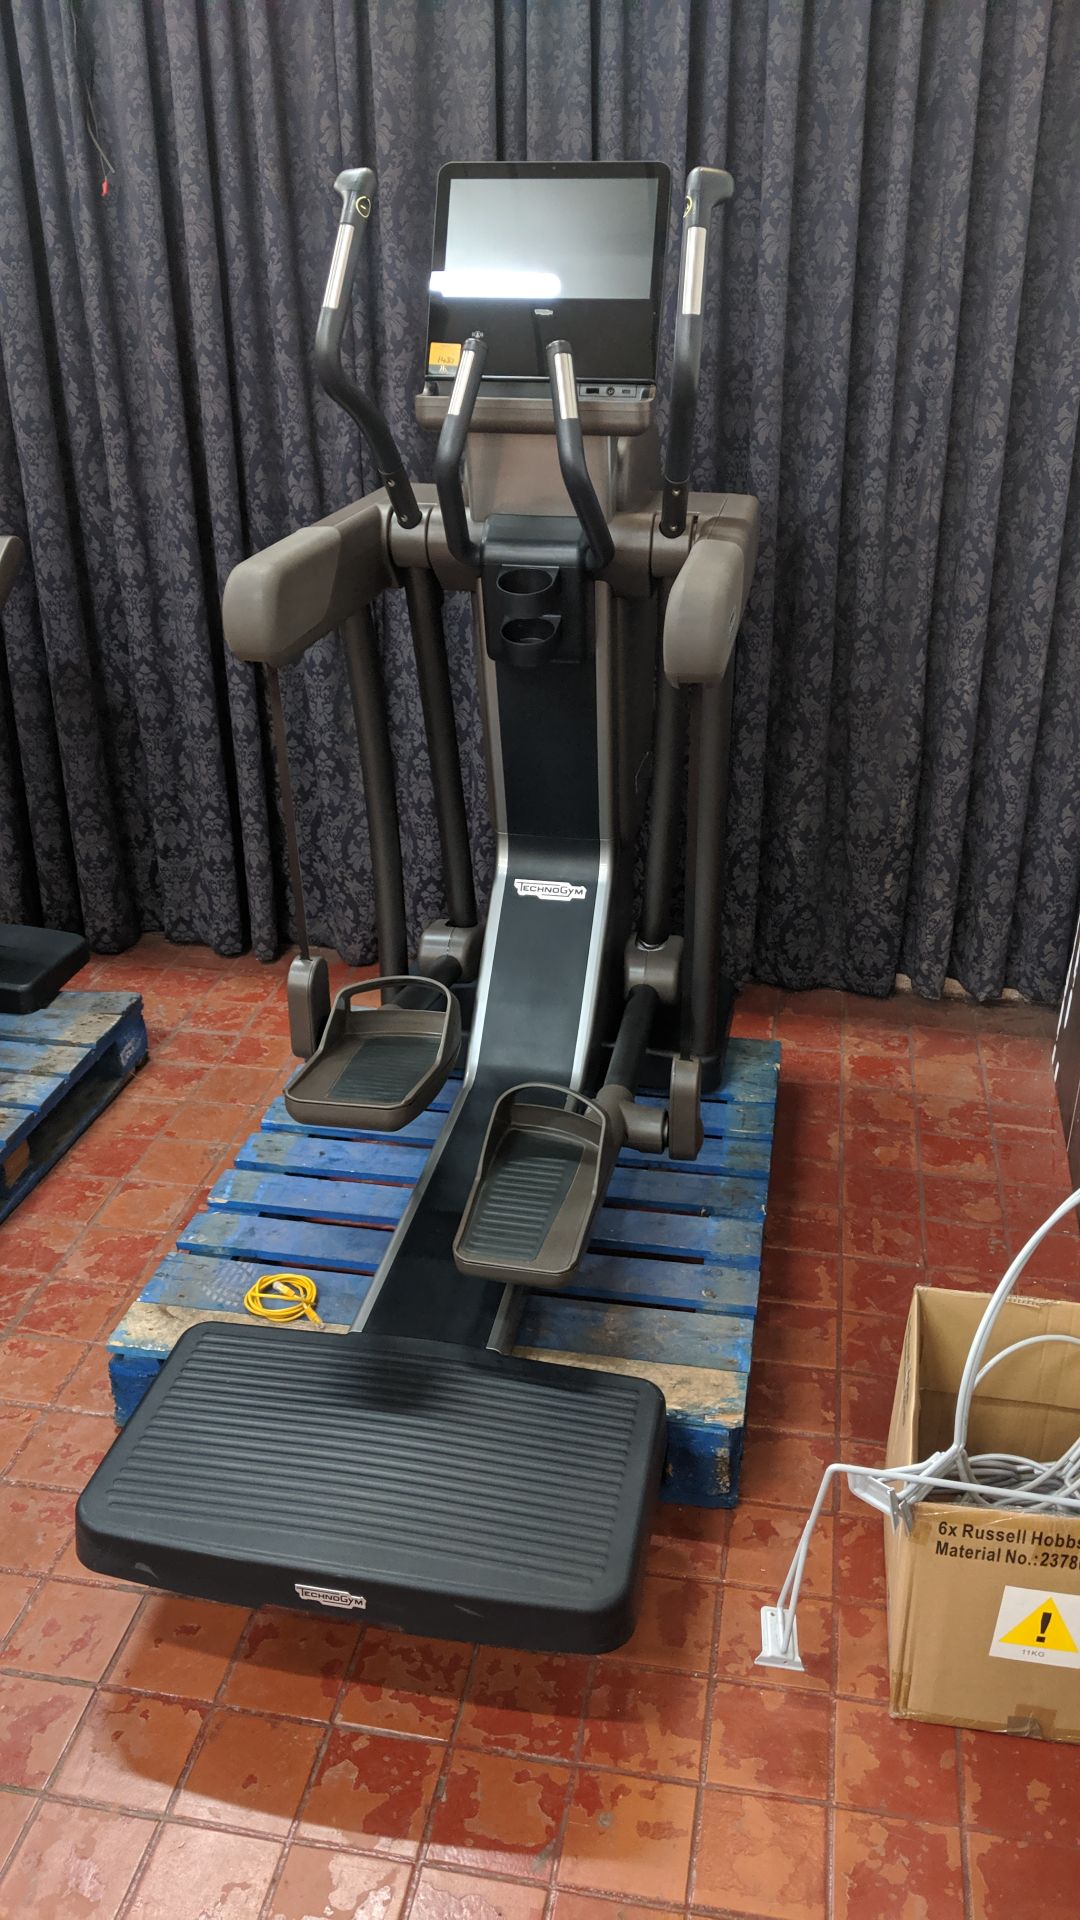 Technogym Vario Artis elliptical cross trainer Purchased new in 2016 - refurbished/recommissioned - Image 8 of 18